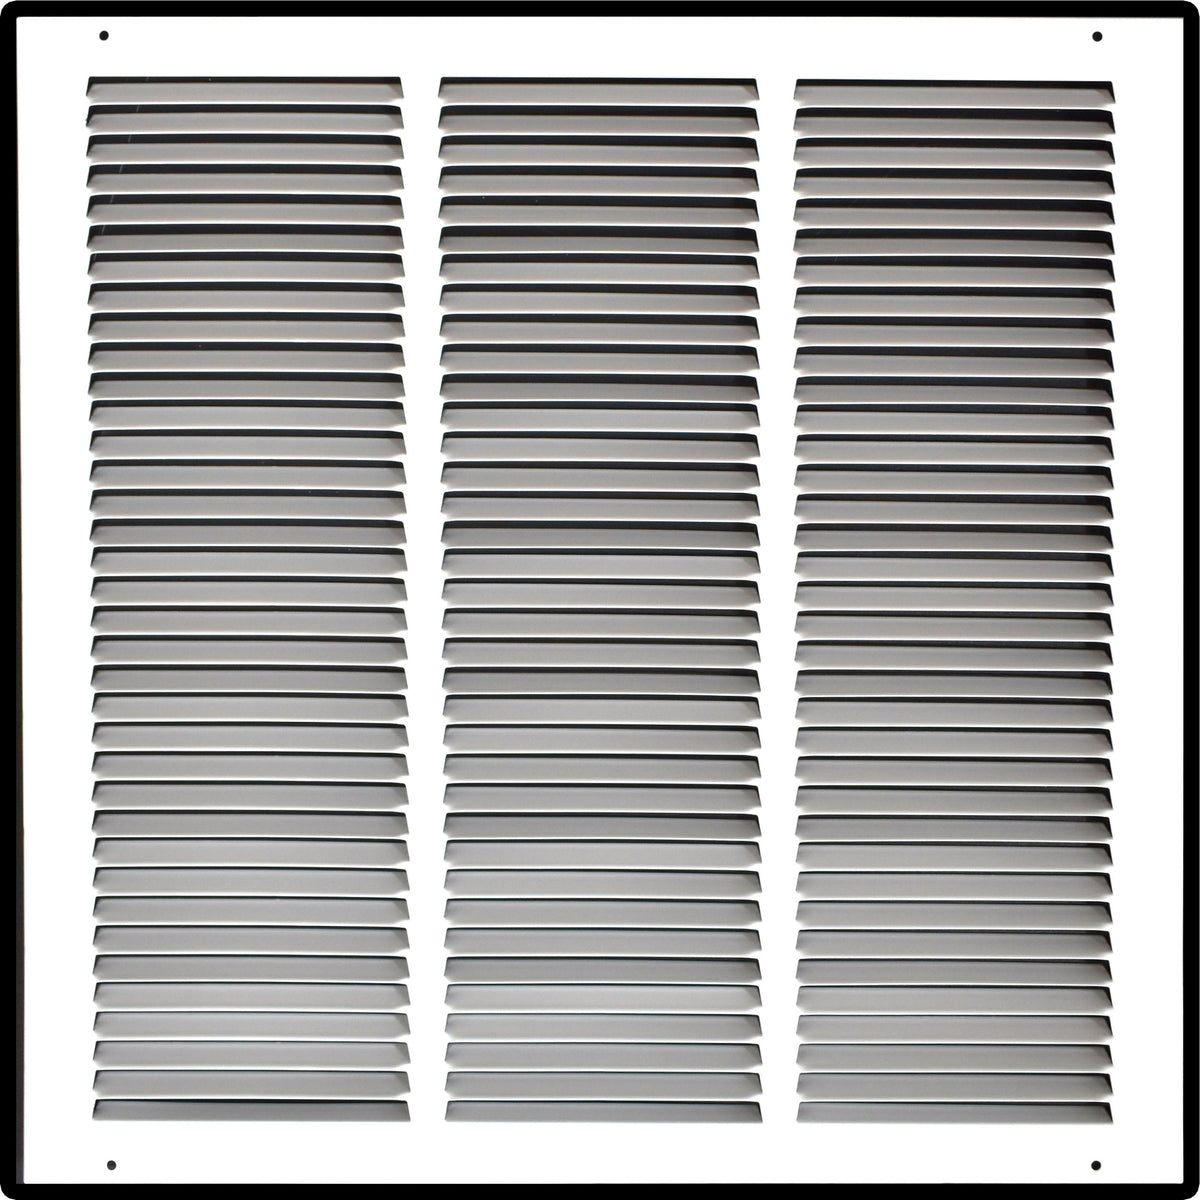 airgrilles 18" x 18" duct opening   hd steel return air grille for sidewall and ceiling 7hnd-flt-rg-wh-18x18 038775640725 - 1